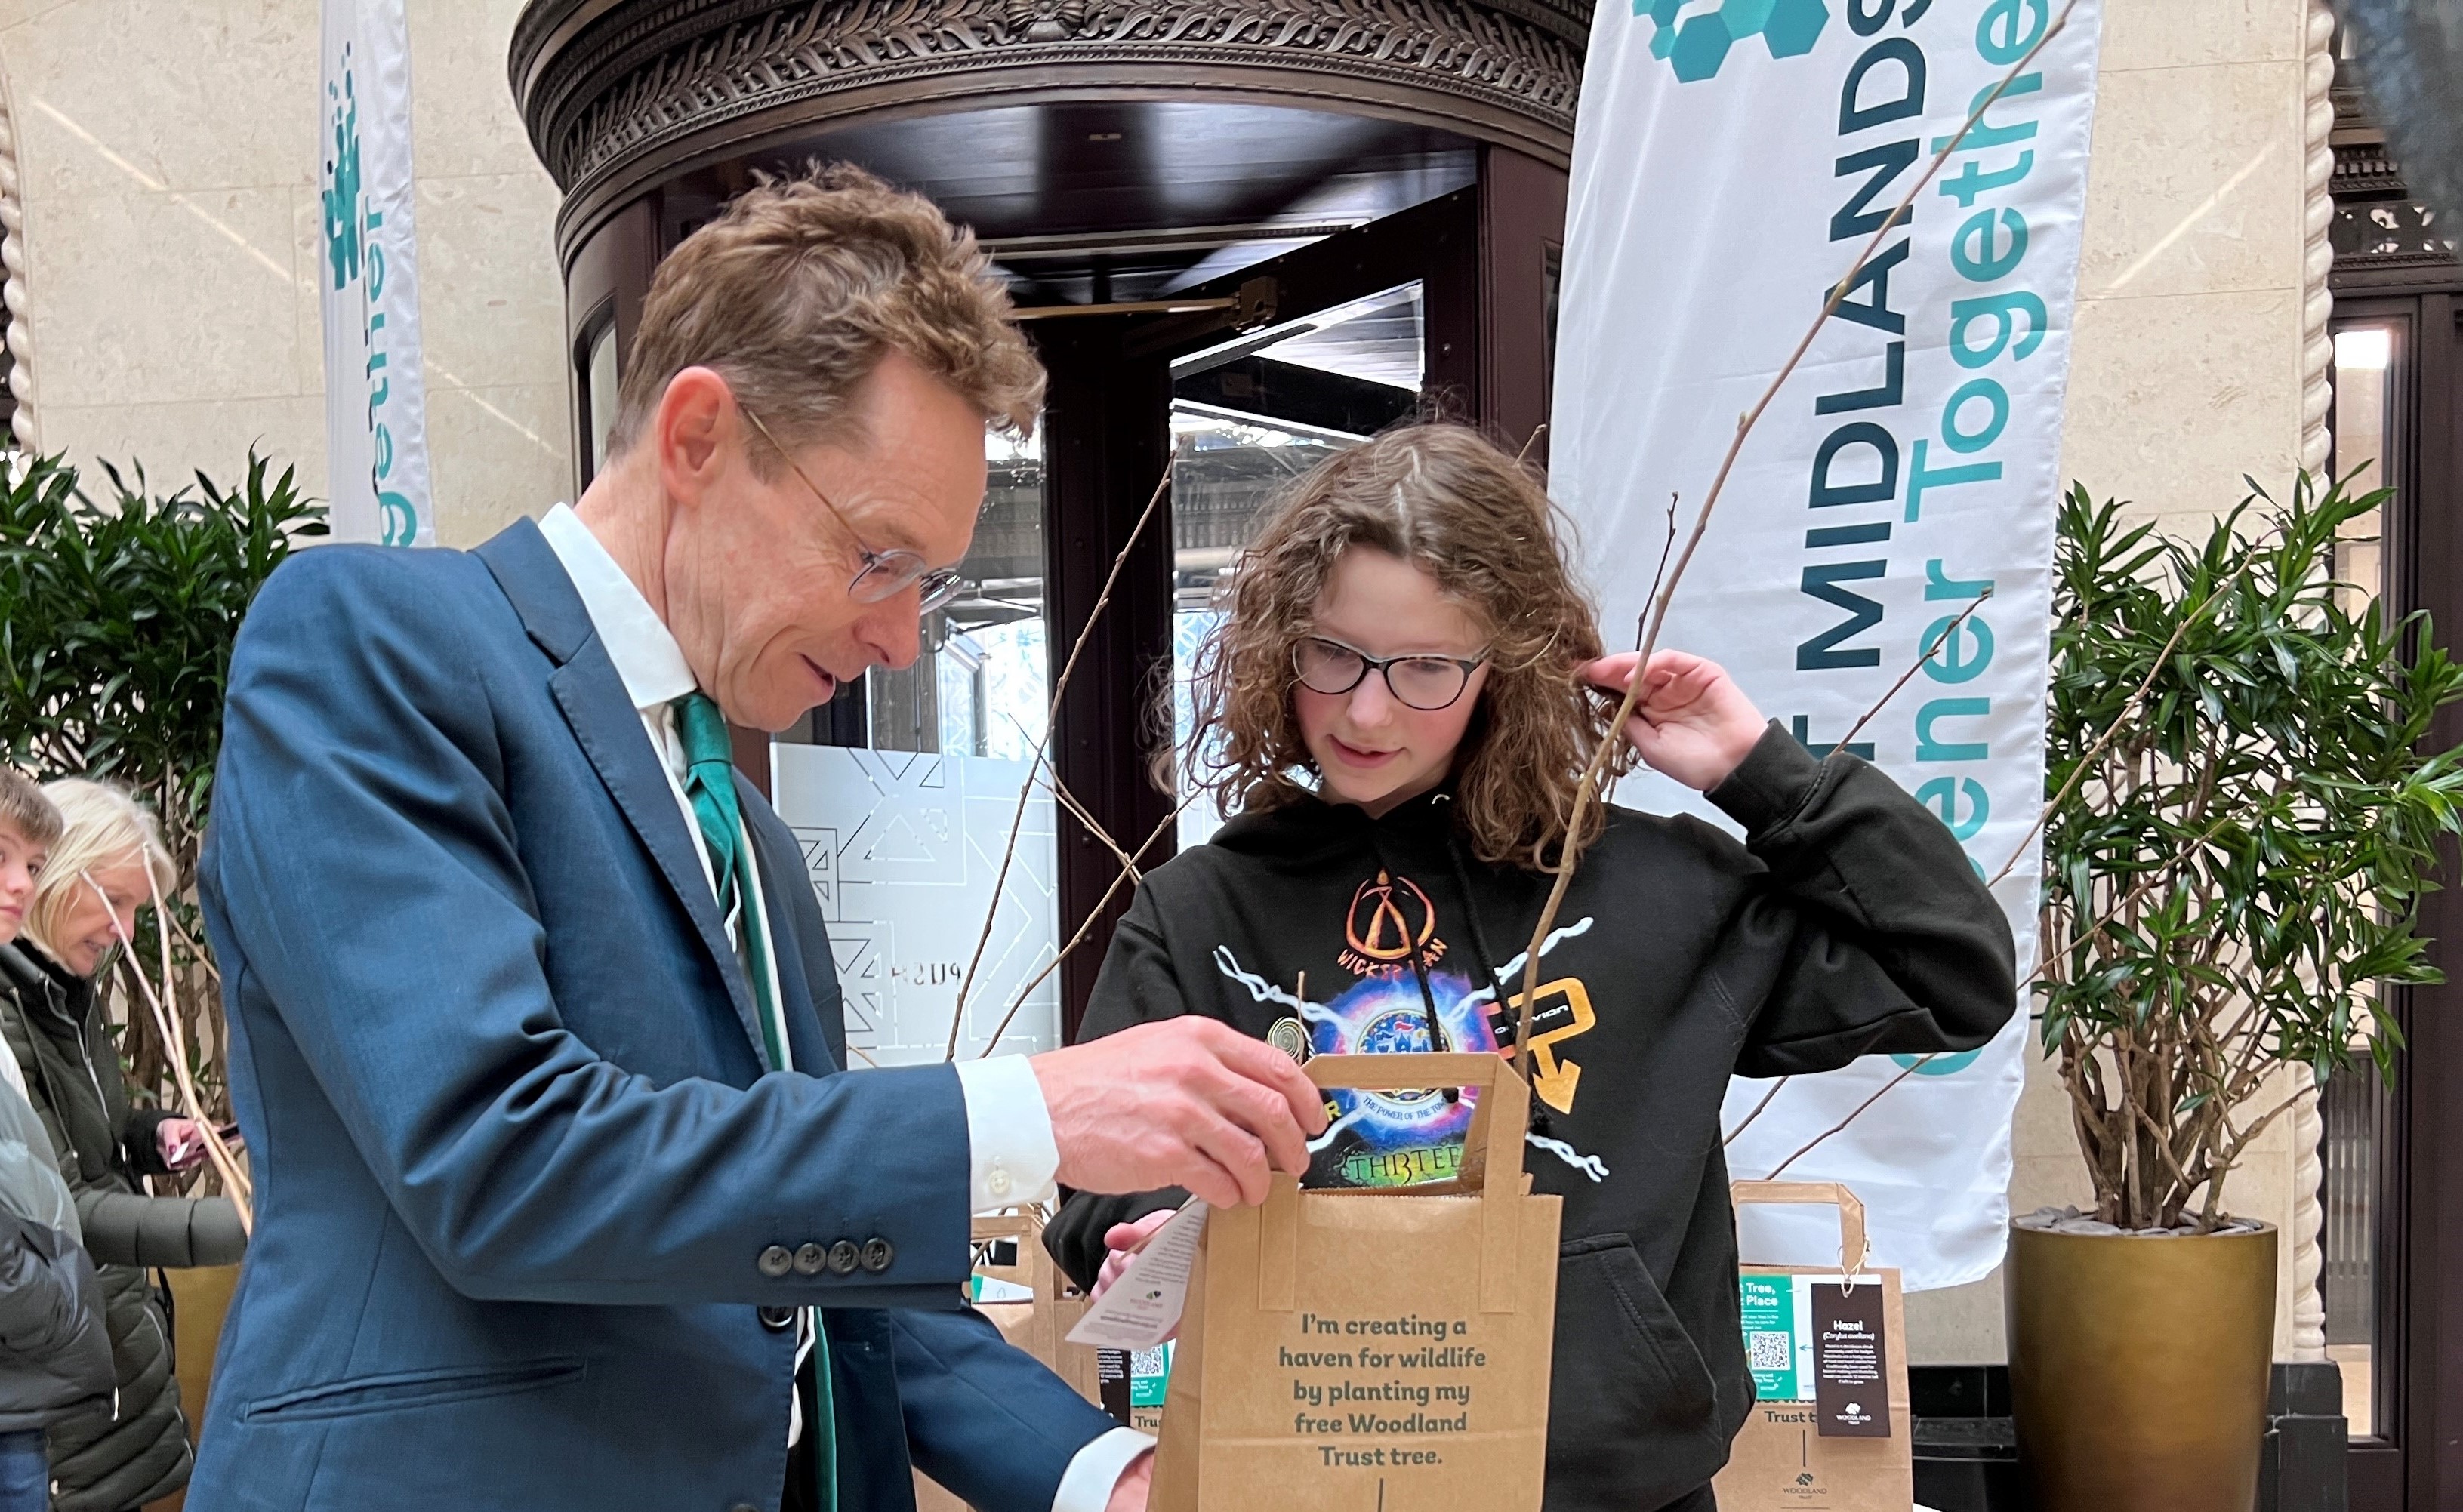 Mayor Andy Street hands a tree to 13-year-old Betty Green at the Exchange